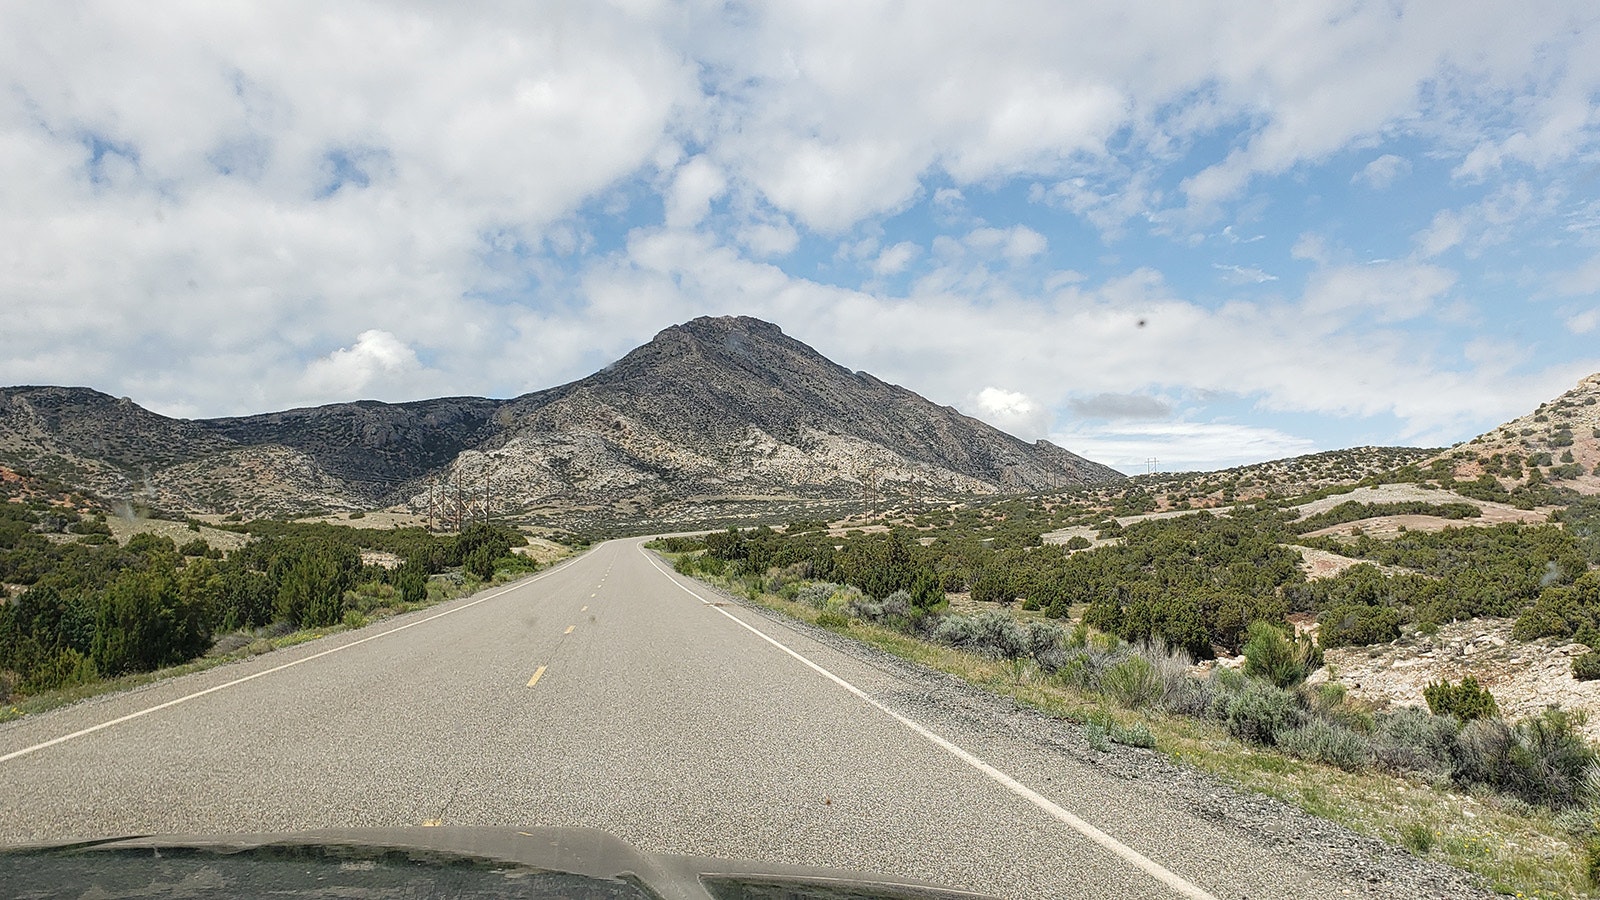 The road to Pryor Mountains.